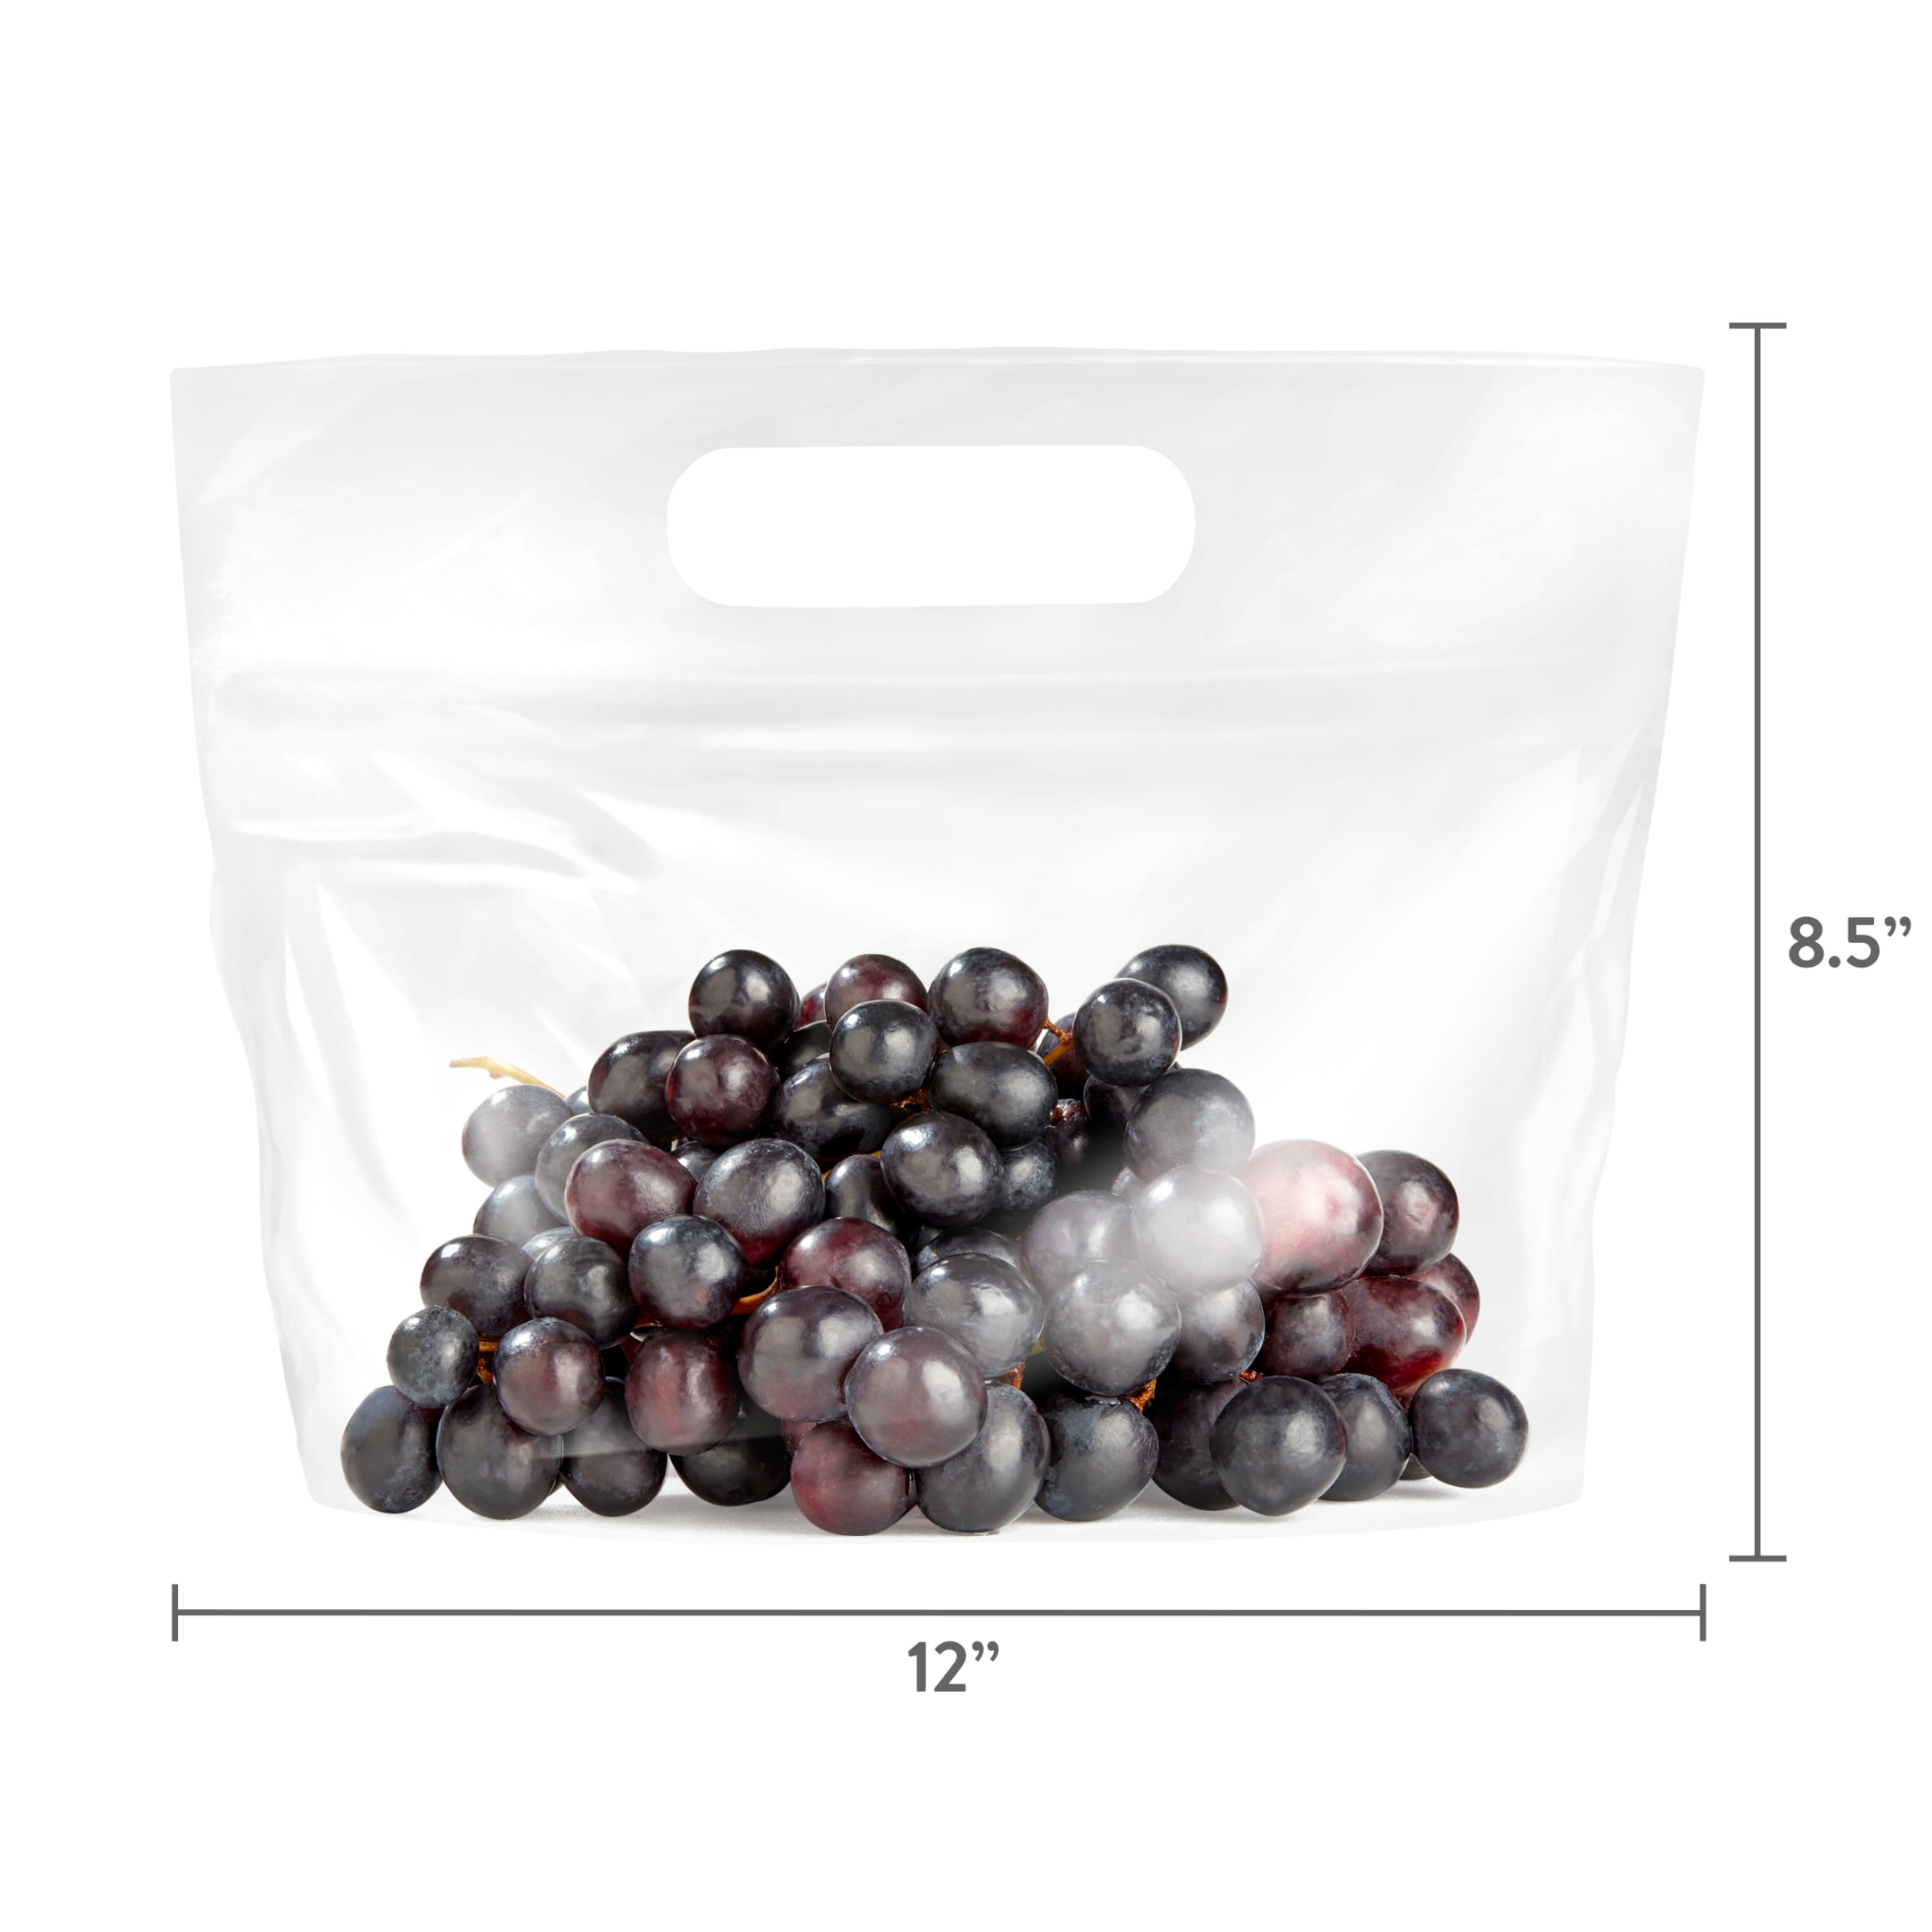 100PCS Fruit Protection Bags Garden Grapes Mesh Bag Agricultural Orchard  Anti-Bird Netting Cover Vegetable Strawberry Grow Bags